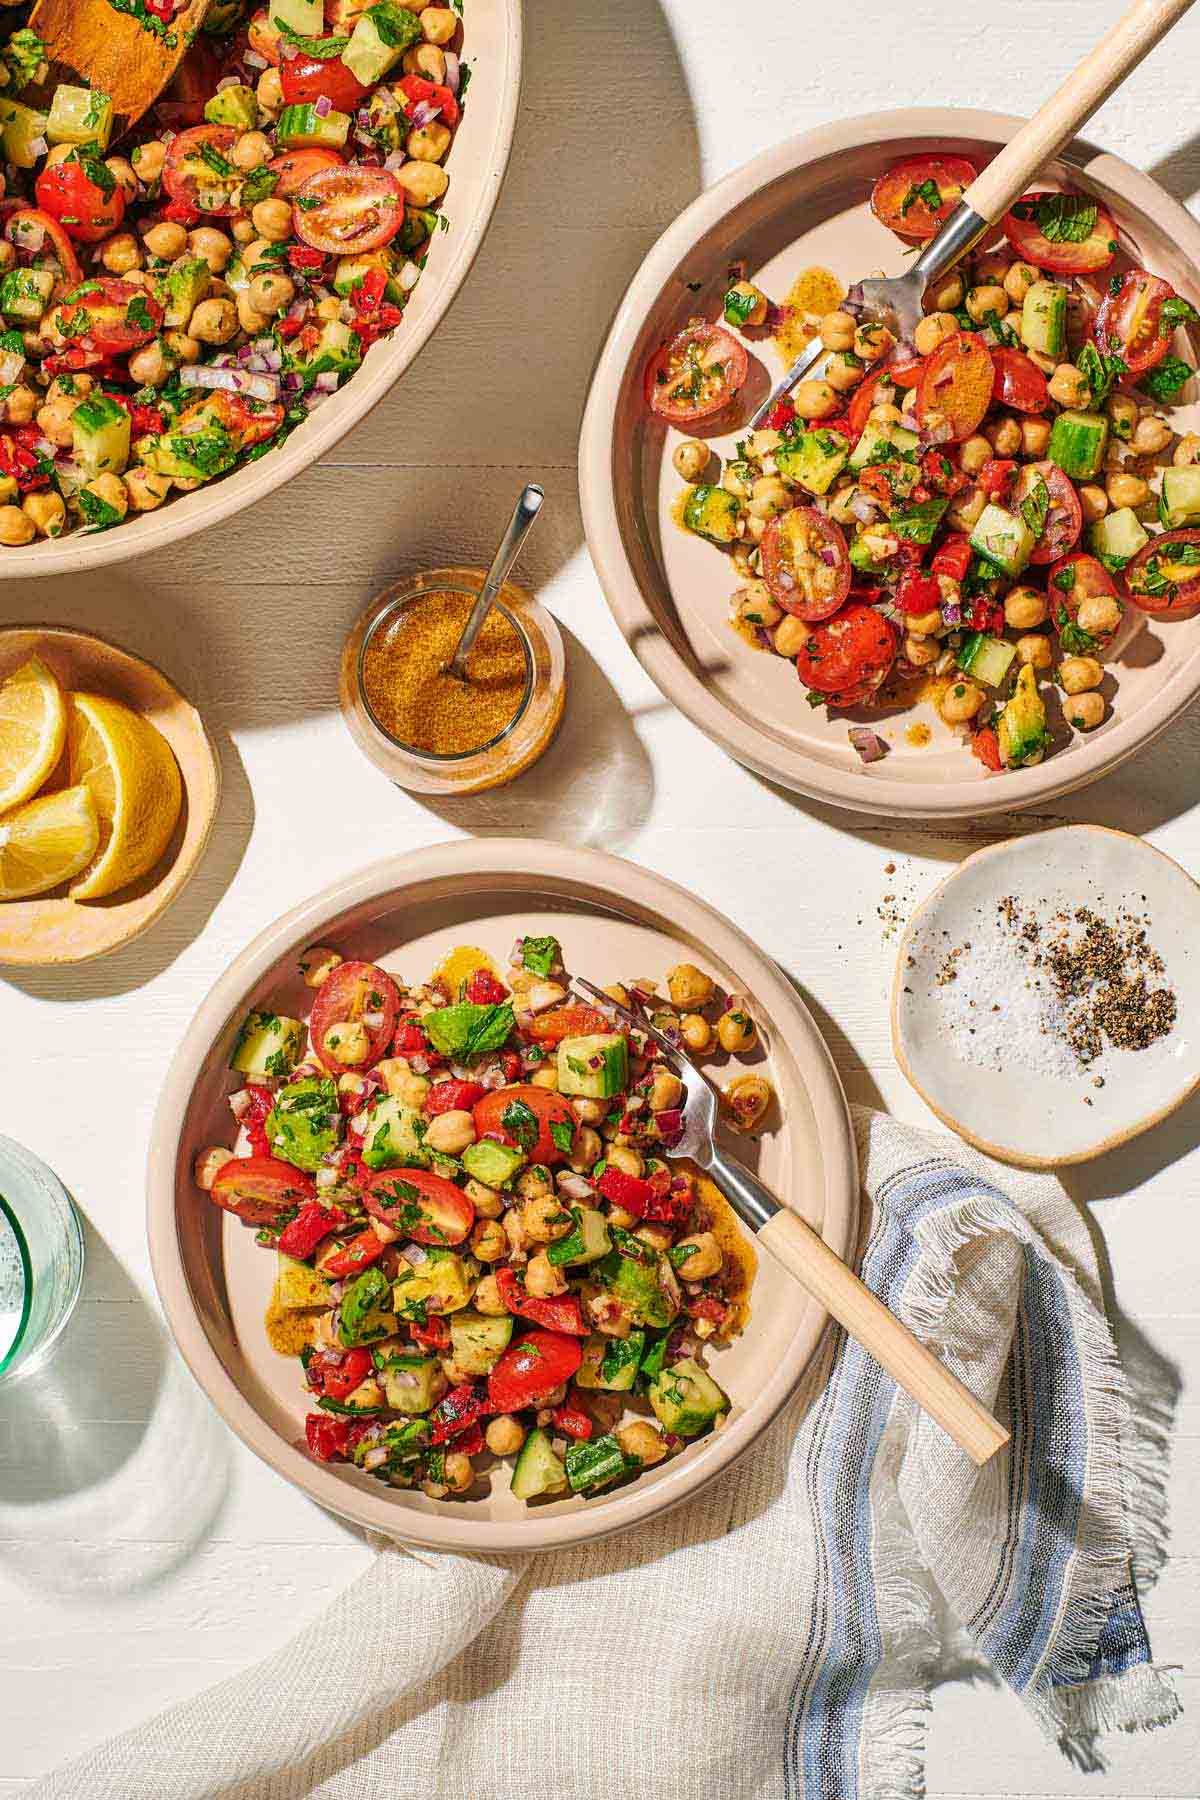 an overhead photo of two bowls of vegan chickpea salad with forks next to a serving bowl of the salad, a small plate of salt and pepper, a small bowl of lemon wedges, a jar of dijon dressing with a spoon, a glass of water and a cloth napkin.